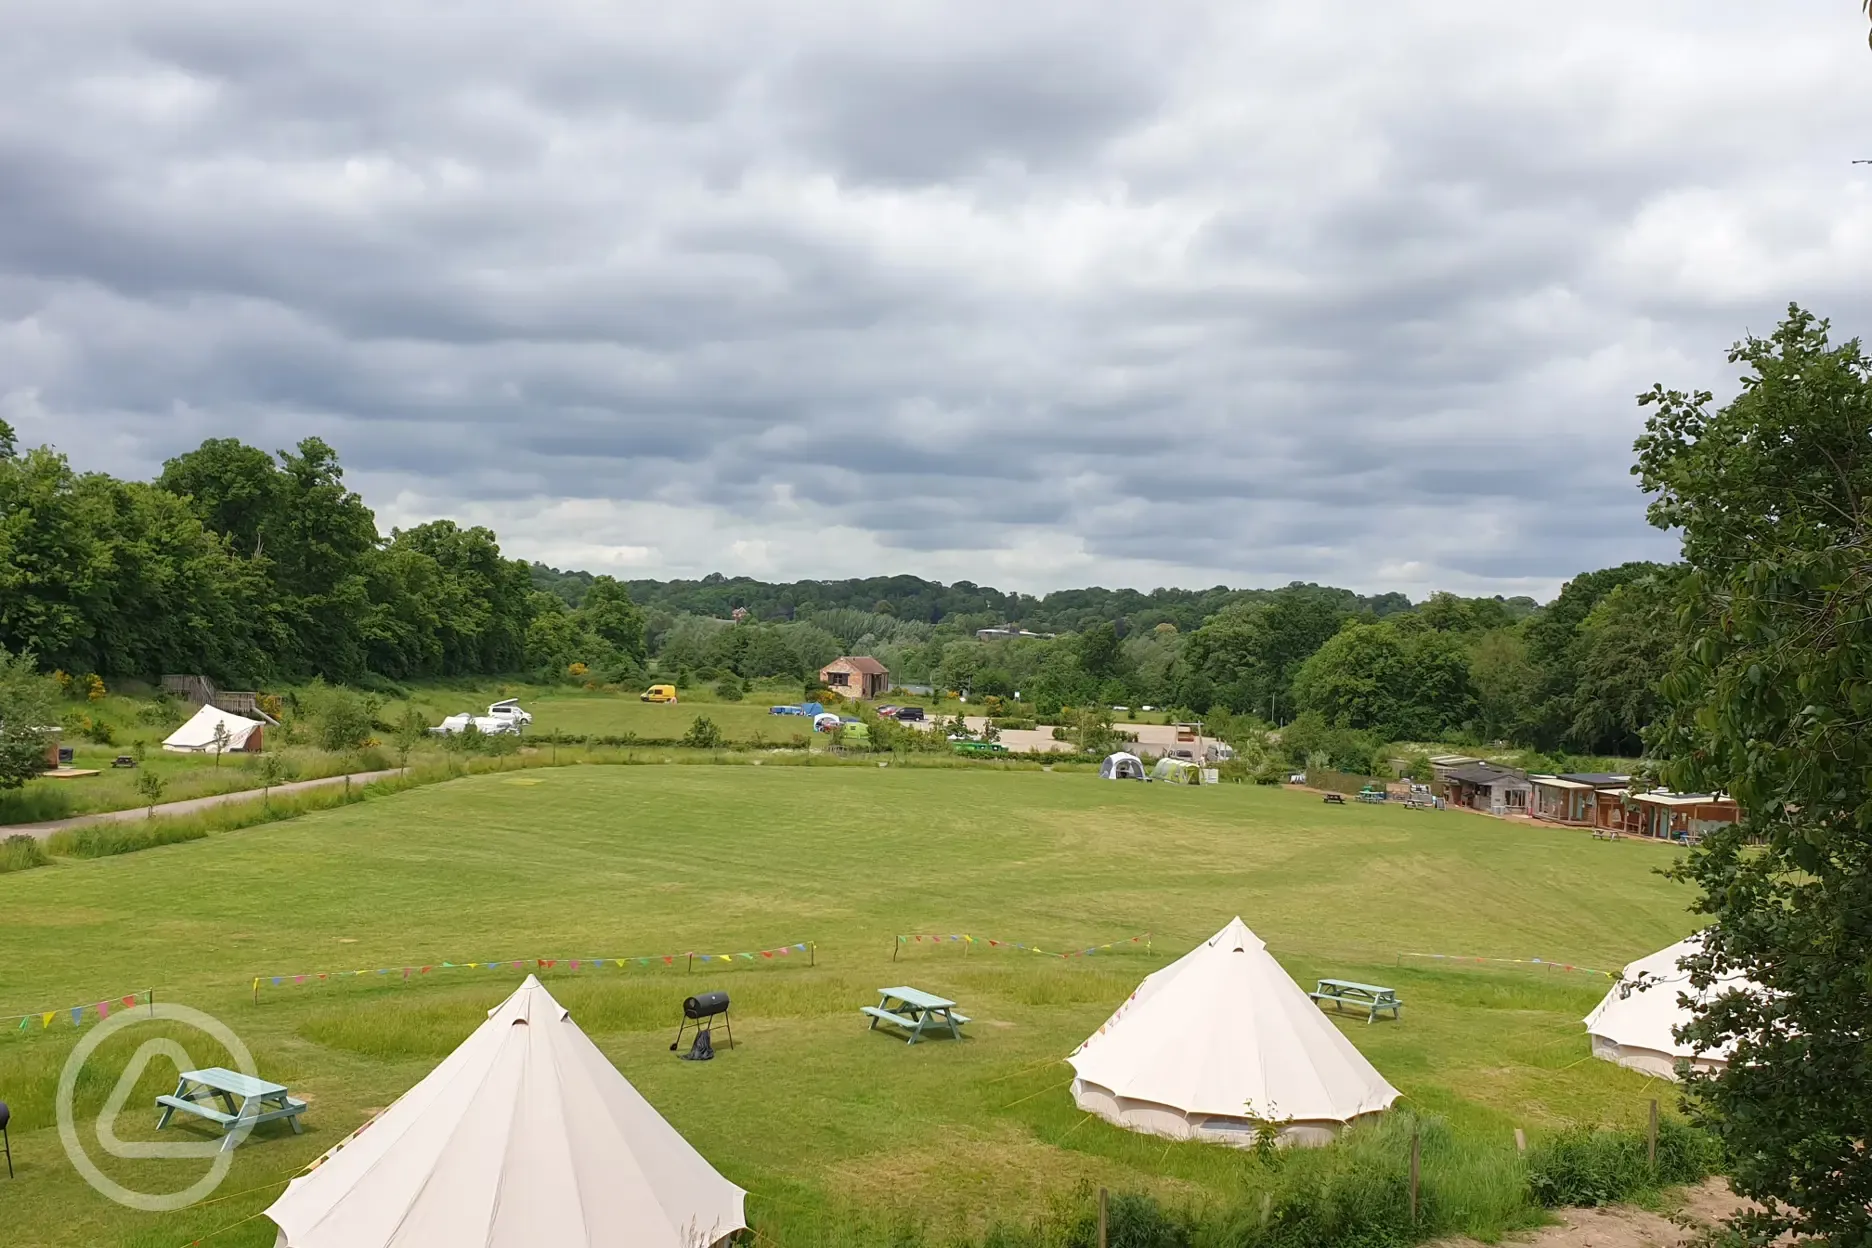 Bell tents and camping area